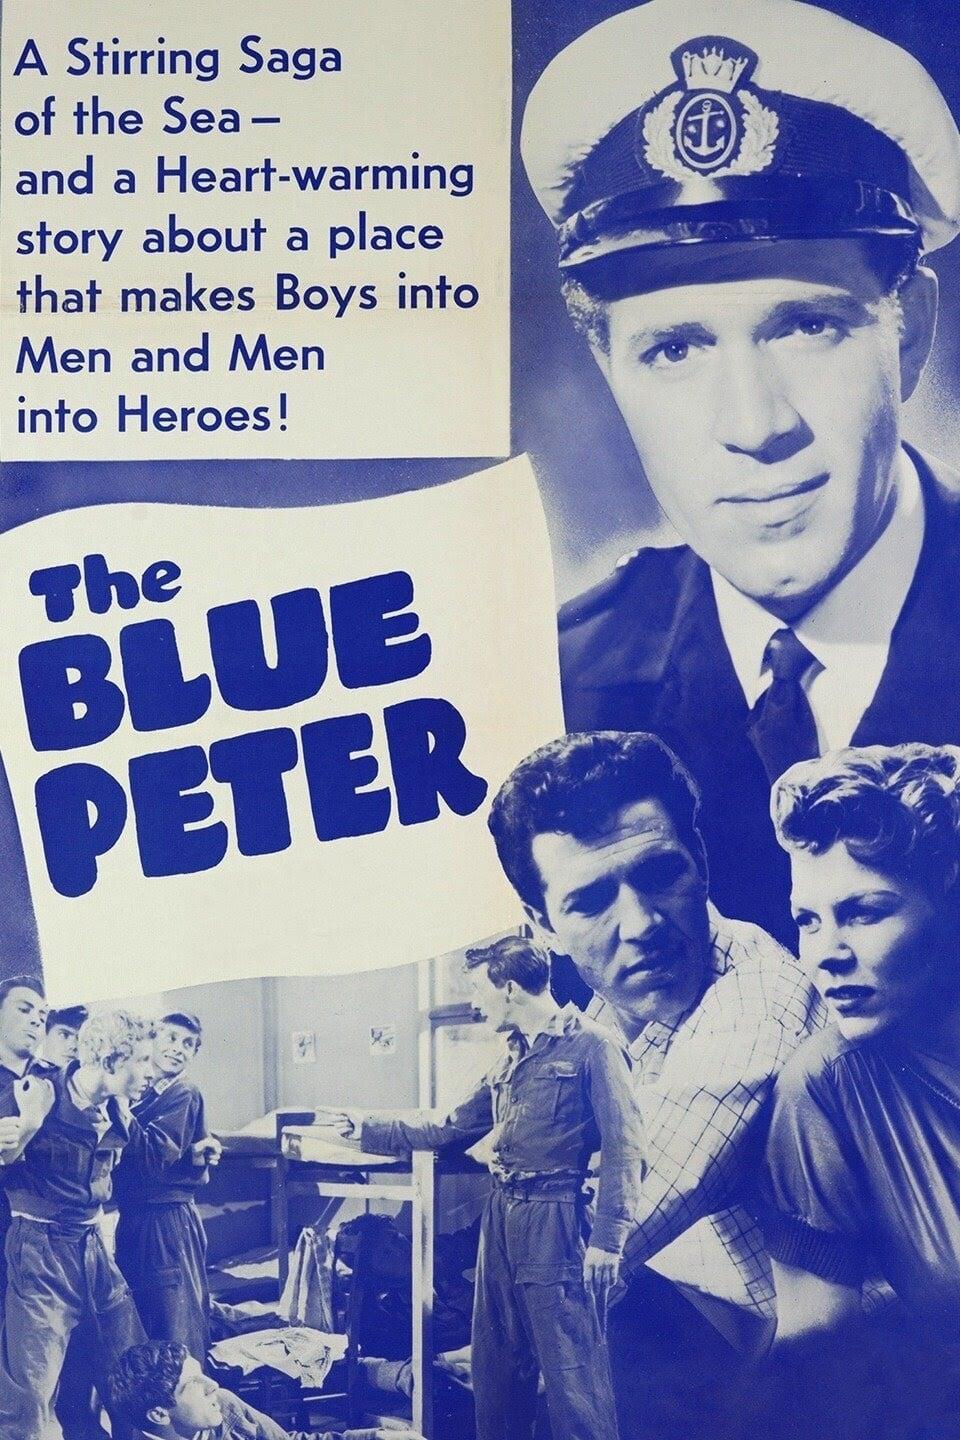 The Blue Peter poster